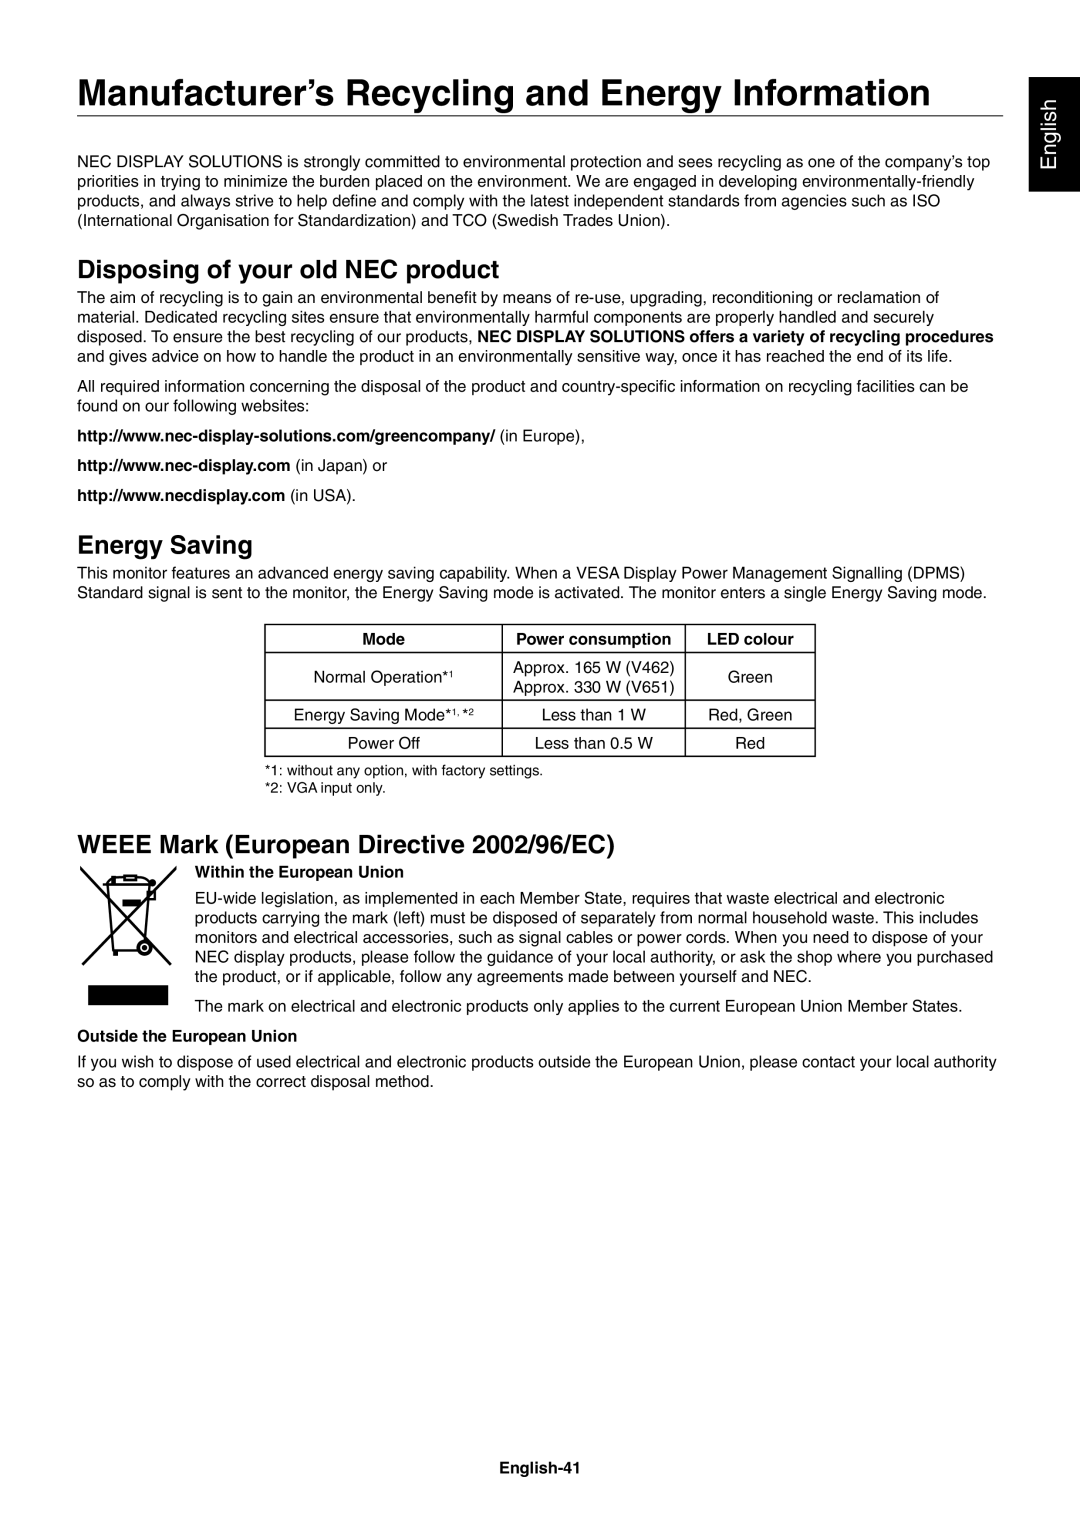 NEC V462, V651 Manufacturer’s Recycling and Energy Information, Disposing of your old NEC product, Energy Saving, English 